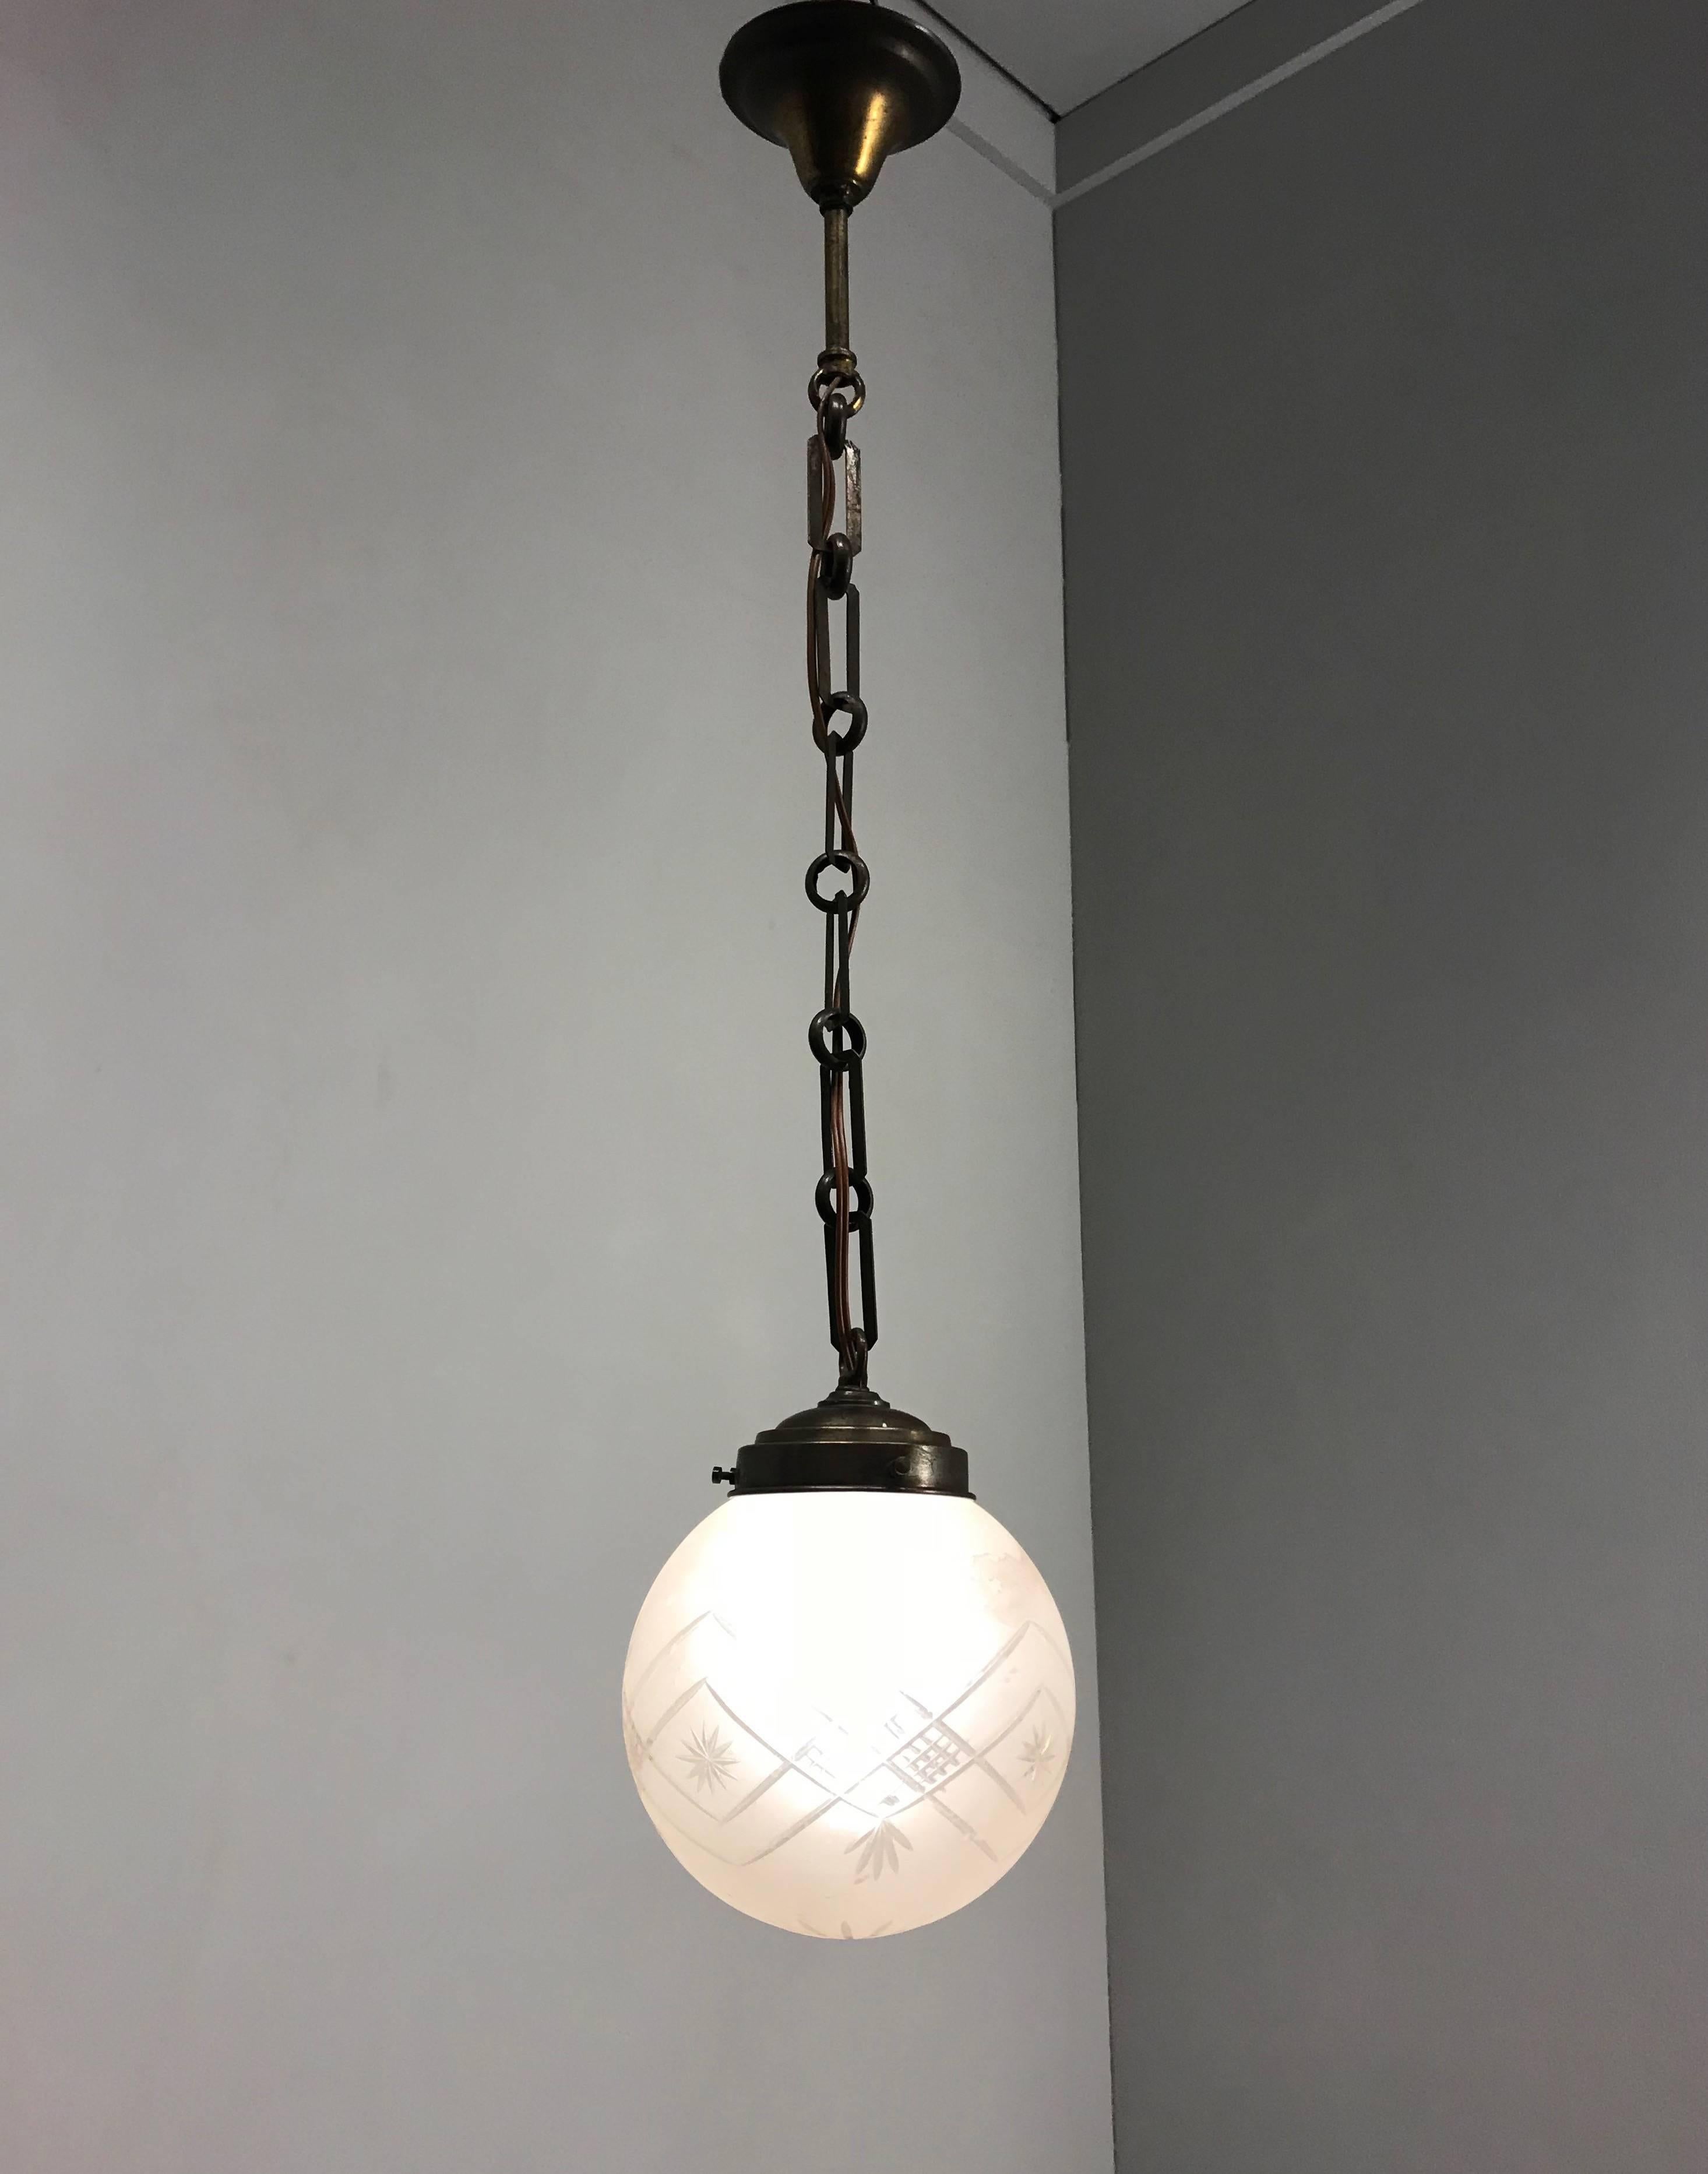 Good looking, practical and small size pendant. 

This stylish and handcrafted pendant is a joy to look at, both on and off. It is beautiful pendants such as this one that can create just the right atmosphere you are looking for. This particular